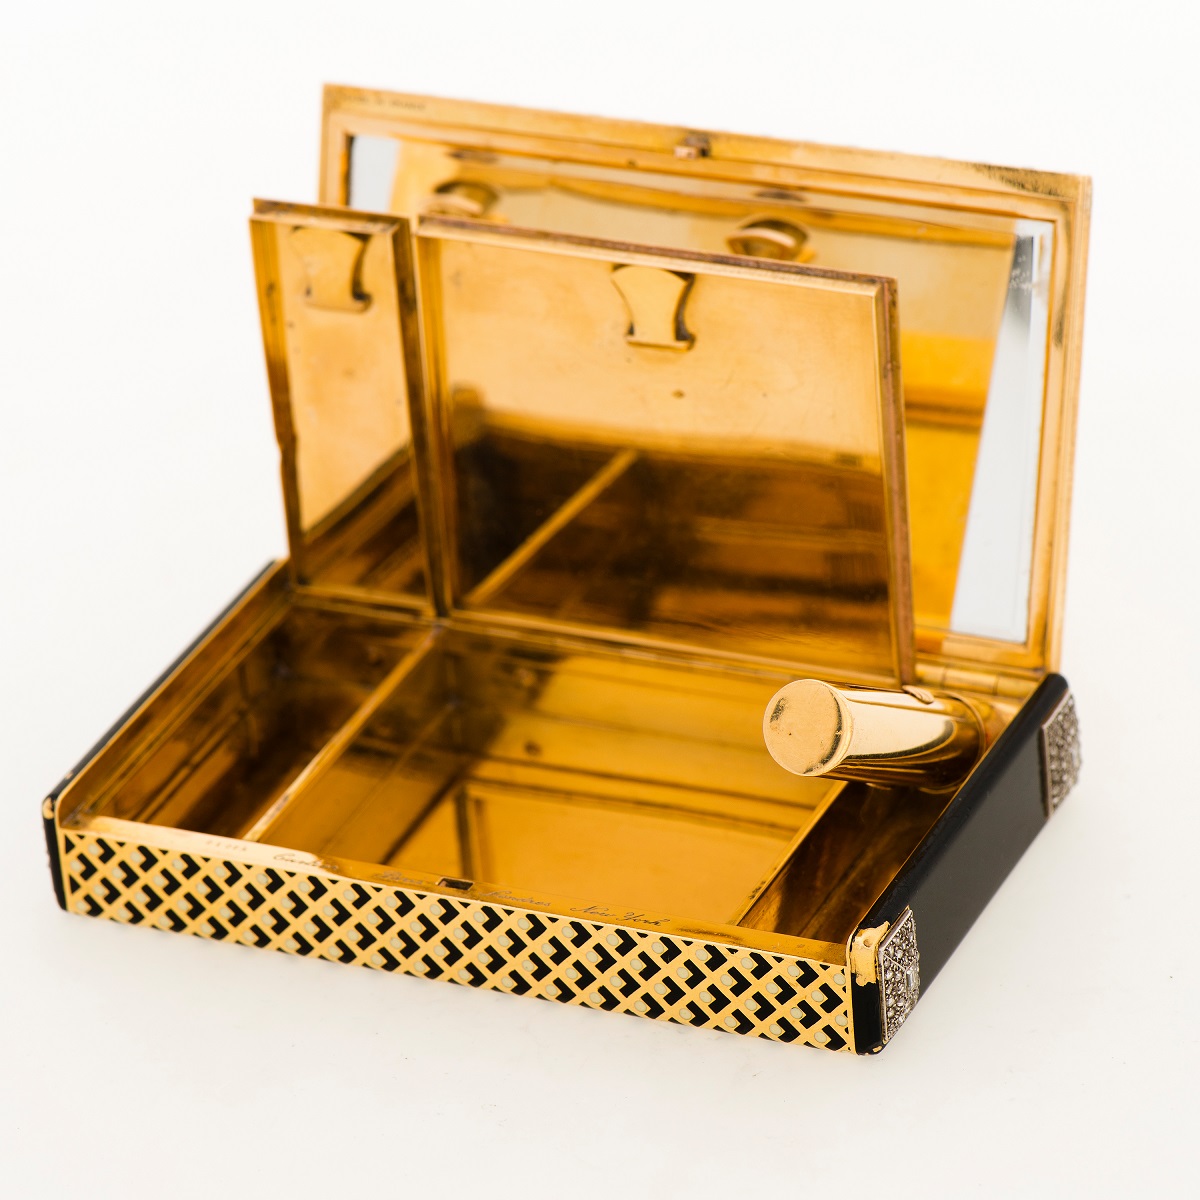 What Is A Vanity Case Used For